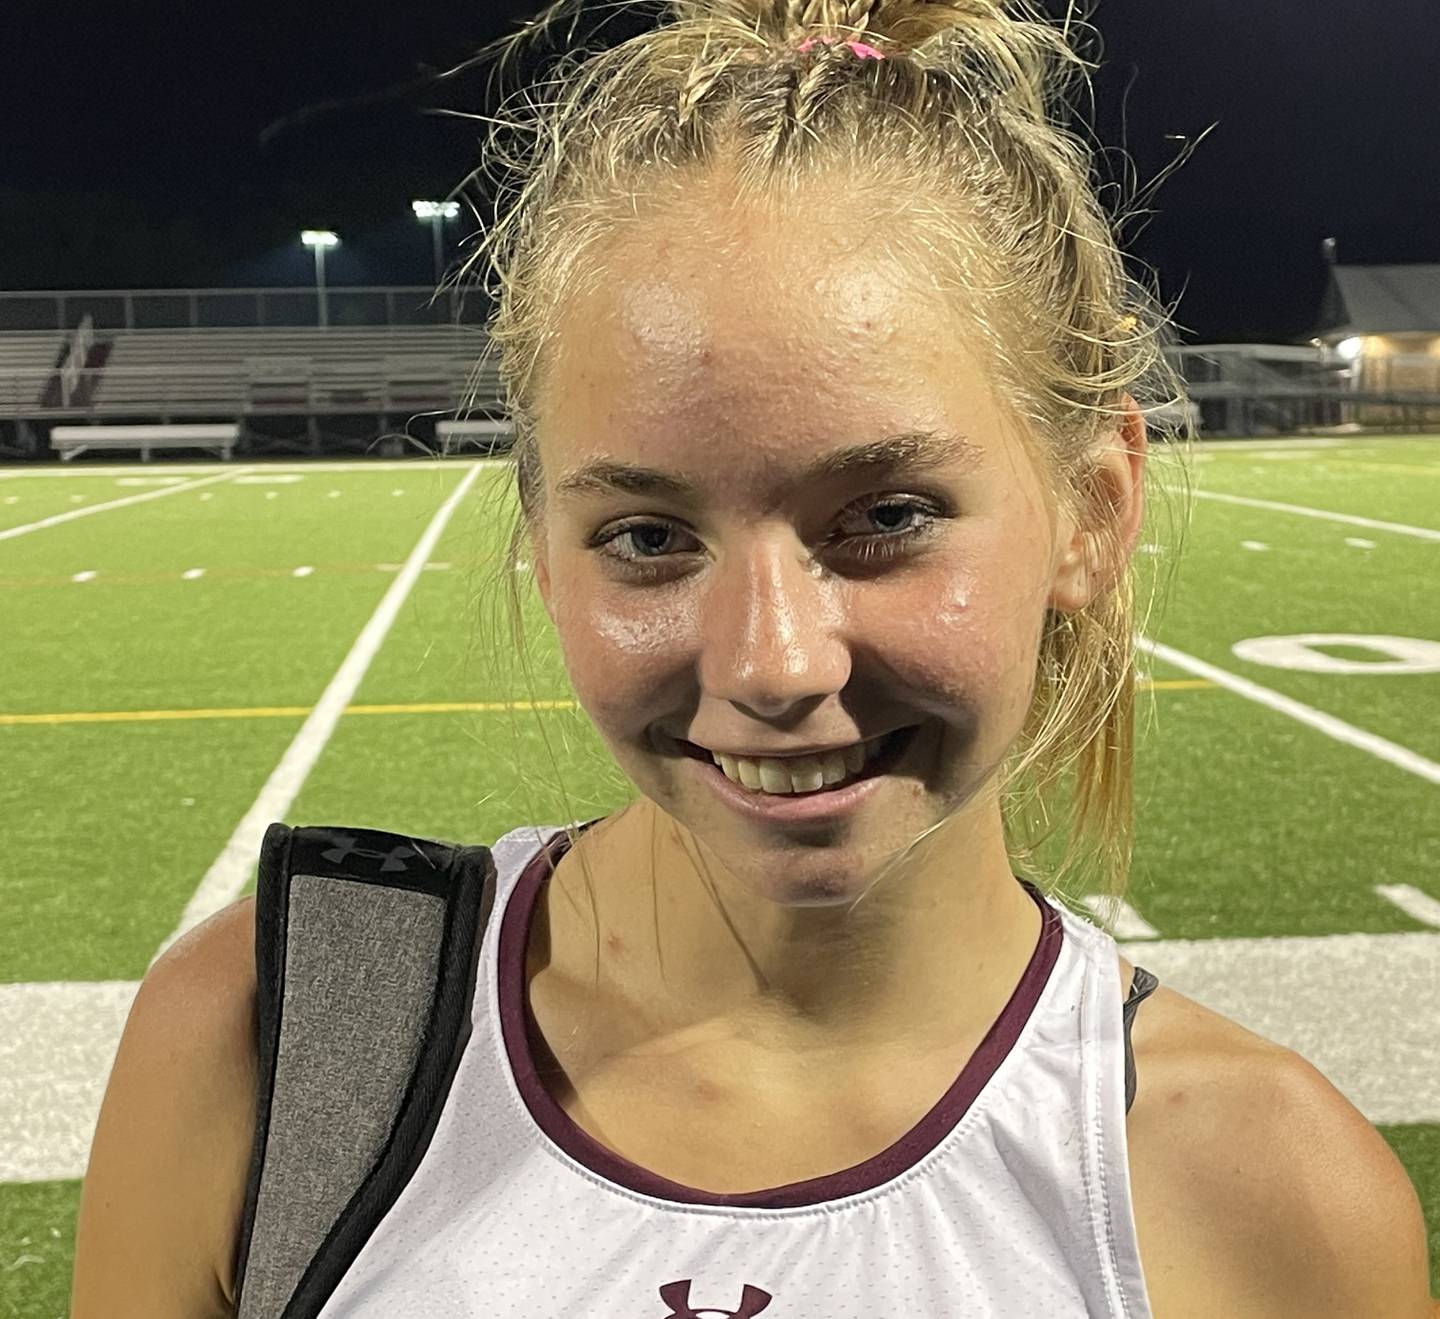 Chloe Page, a sophomore midfielder, is the flier on Broadneck defensive penalty corners and she upset most of Crofton’s 15 corners, often getting to the ball before the Cardinals could shoot. She also blocked several shots as the Cardinals did not score on any of their corners.